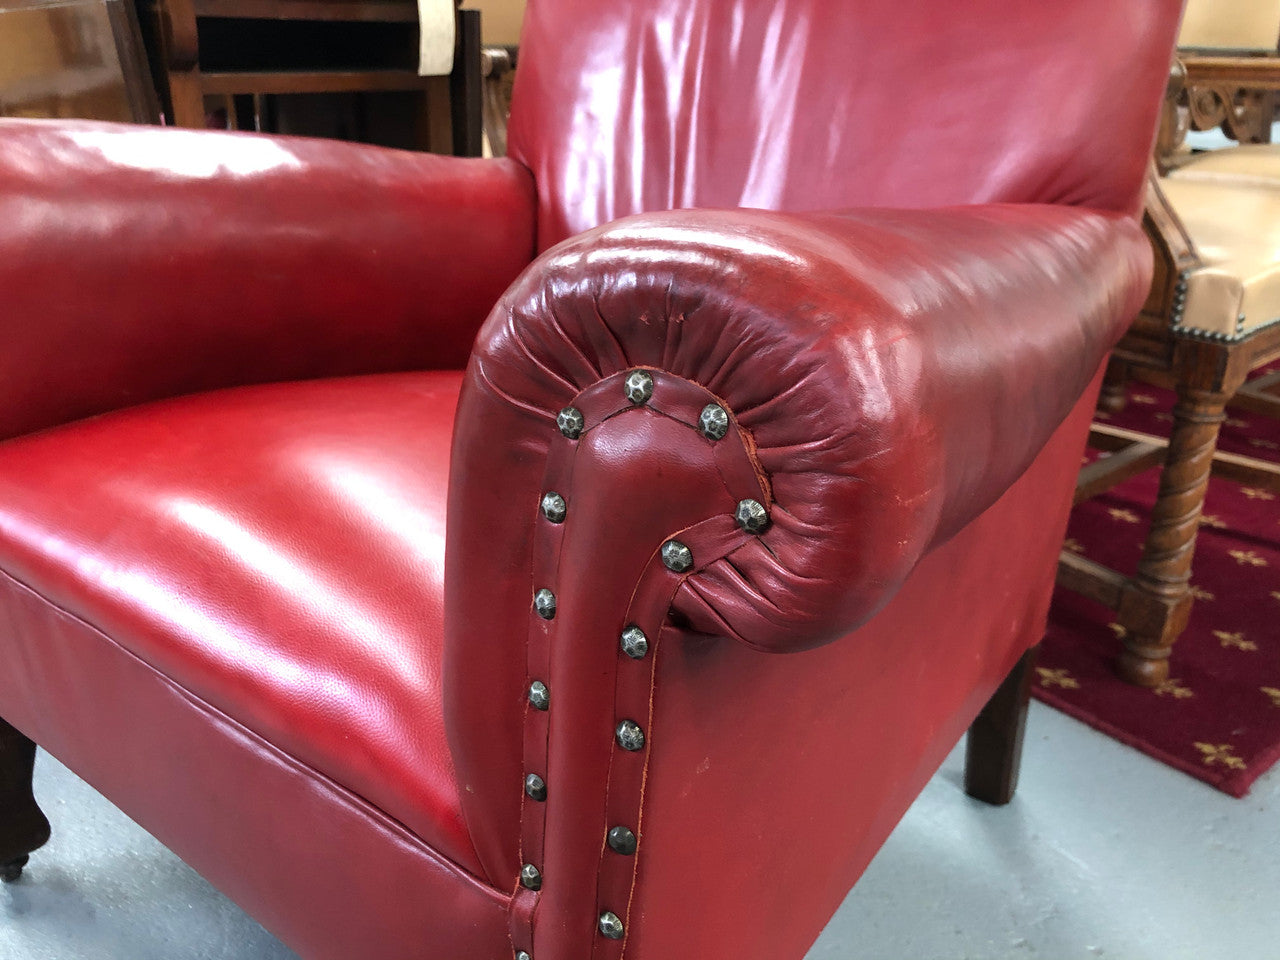 Art Deco arm chair with red leather. From circa 1920's and very comfortable to sit in. It is in good original condition.